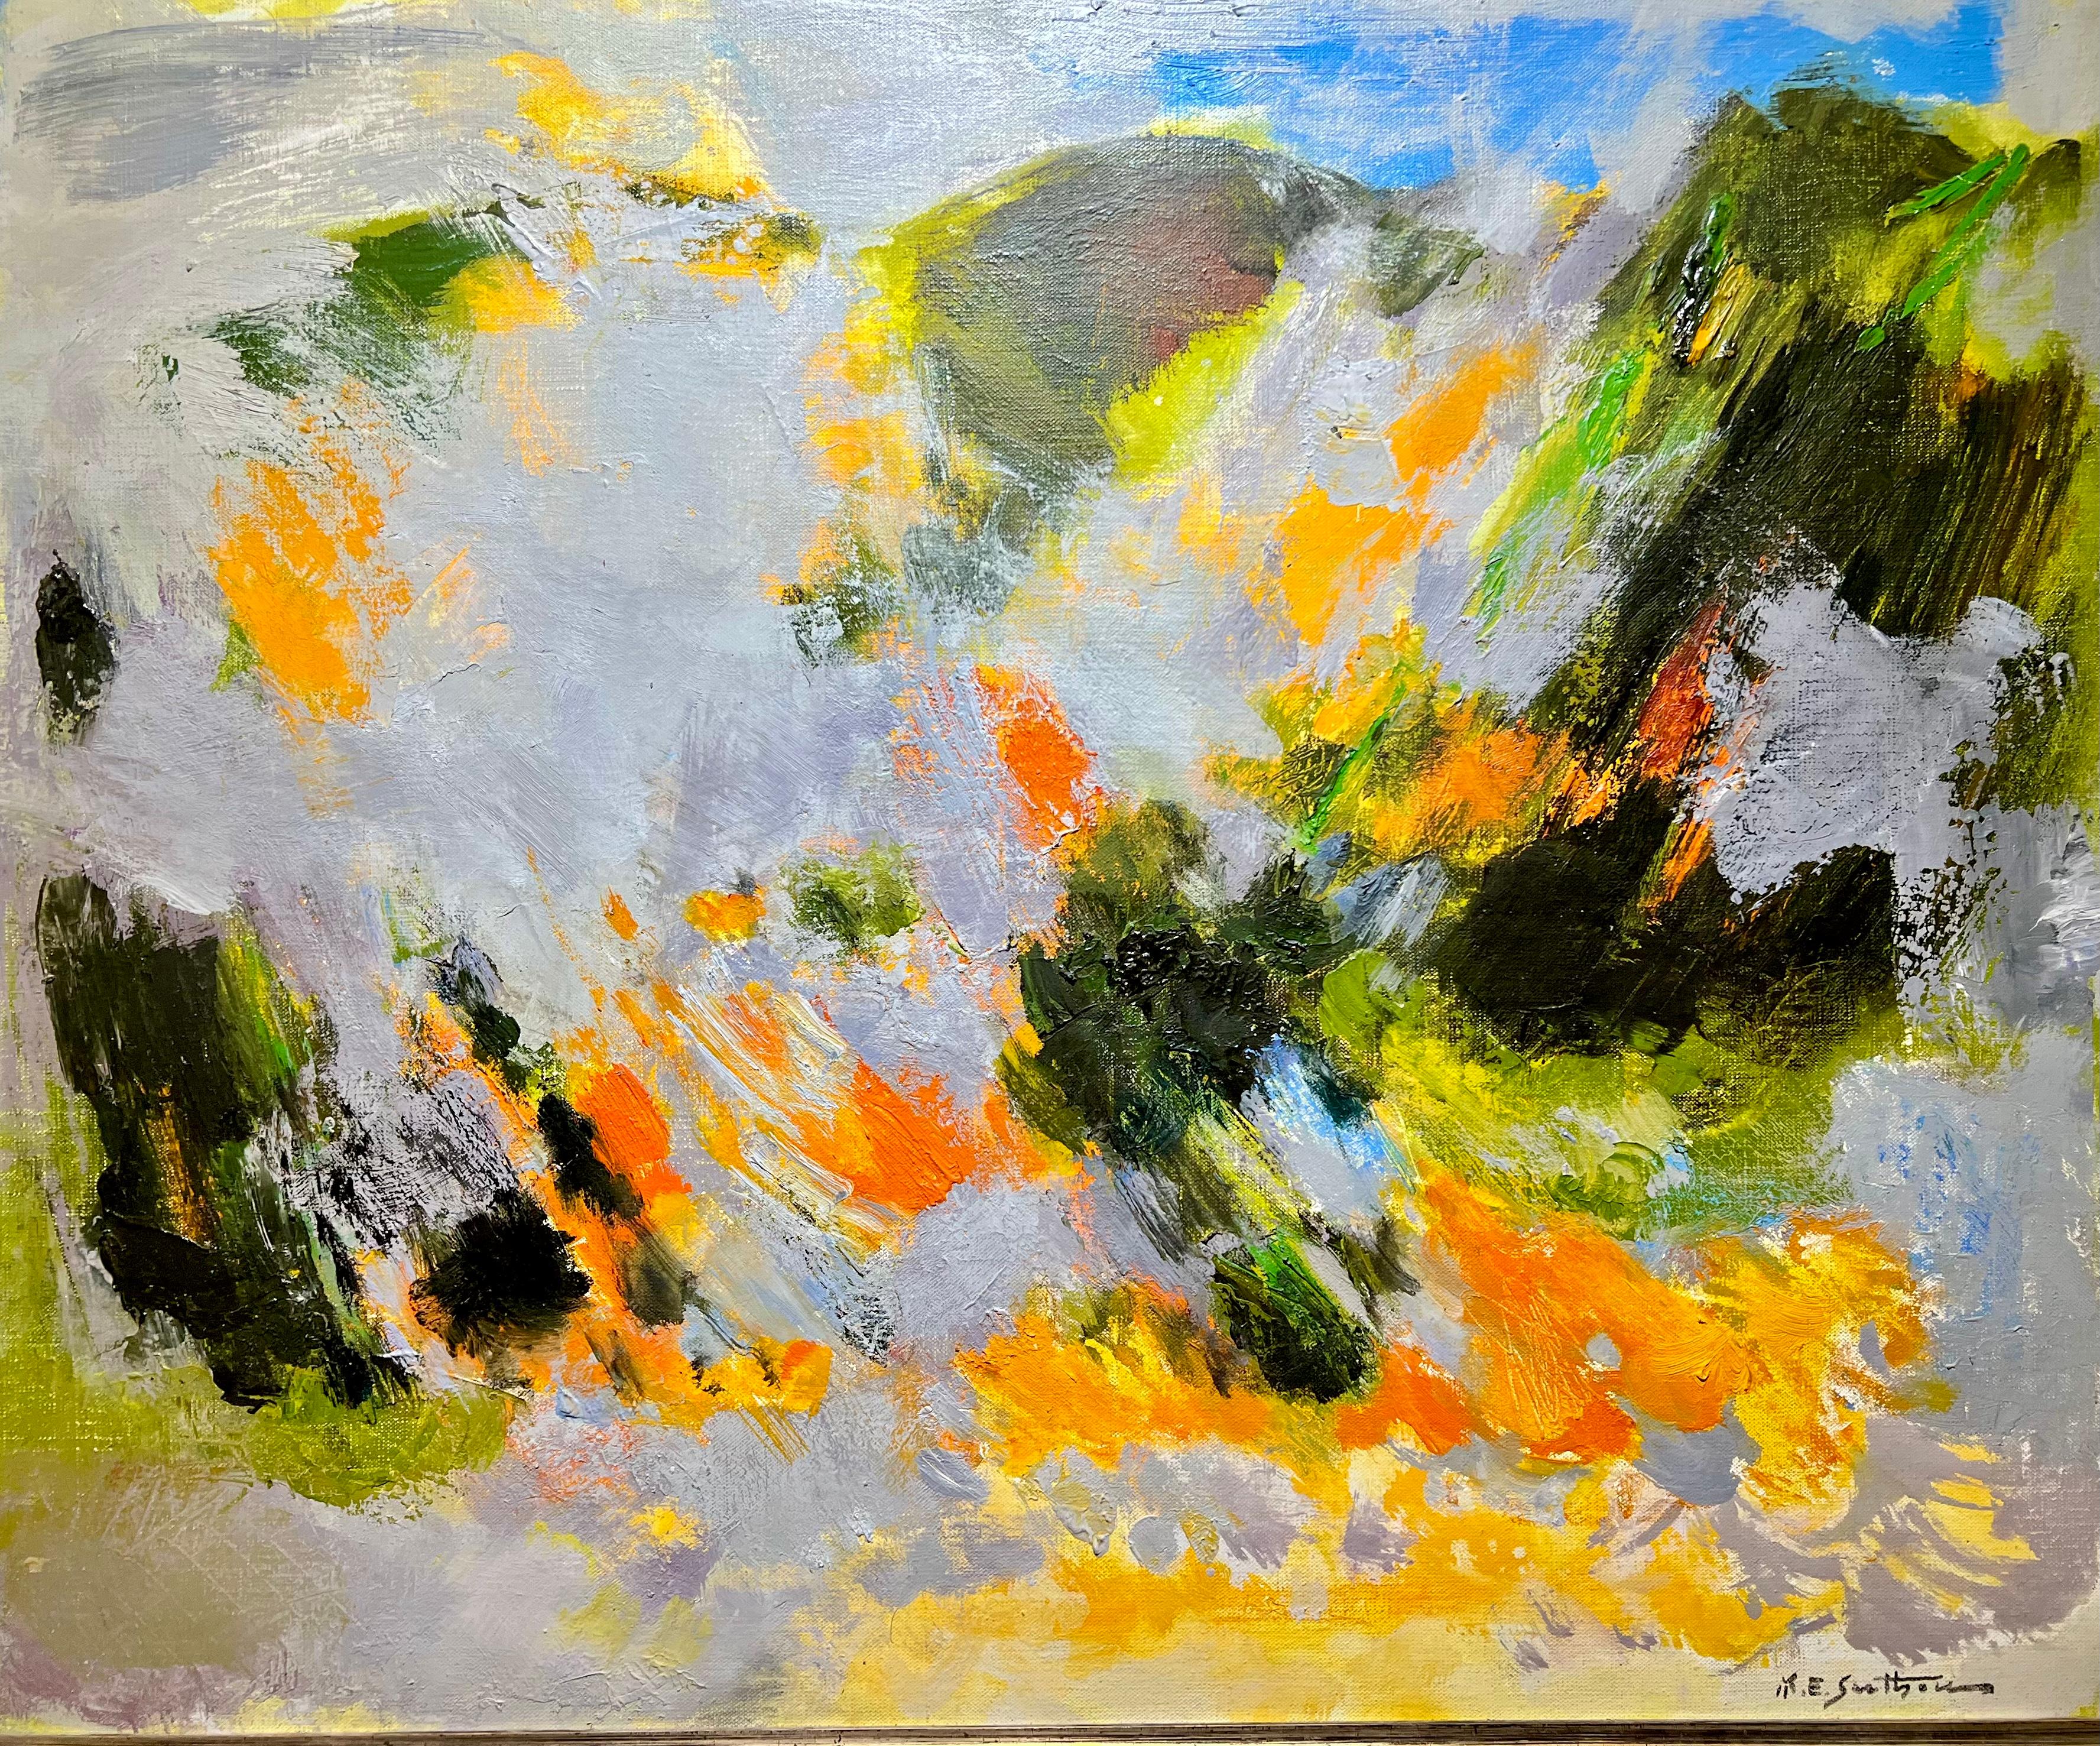 Maurice Élie Sarthou Abstract Painting - 1966 French Abstract Expressionist COLORFUL painting “Feu de Marquis”